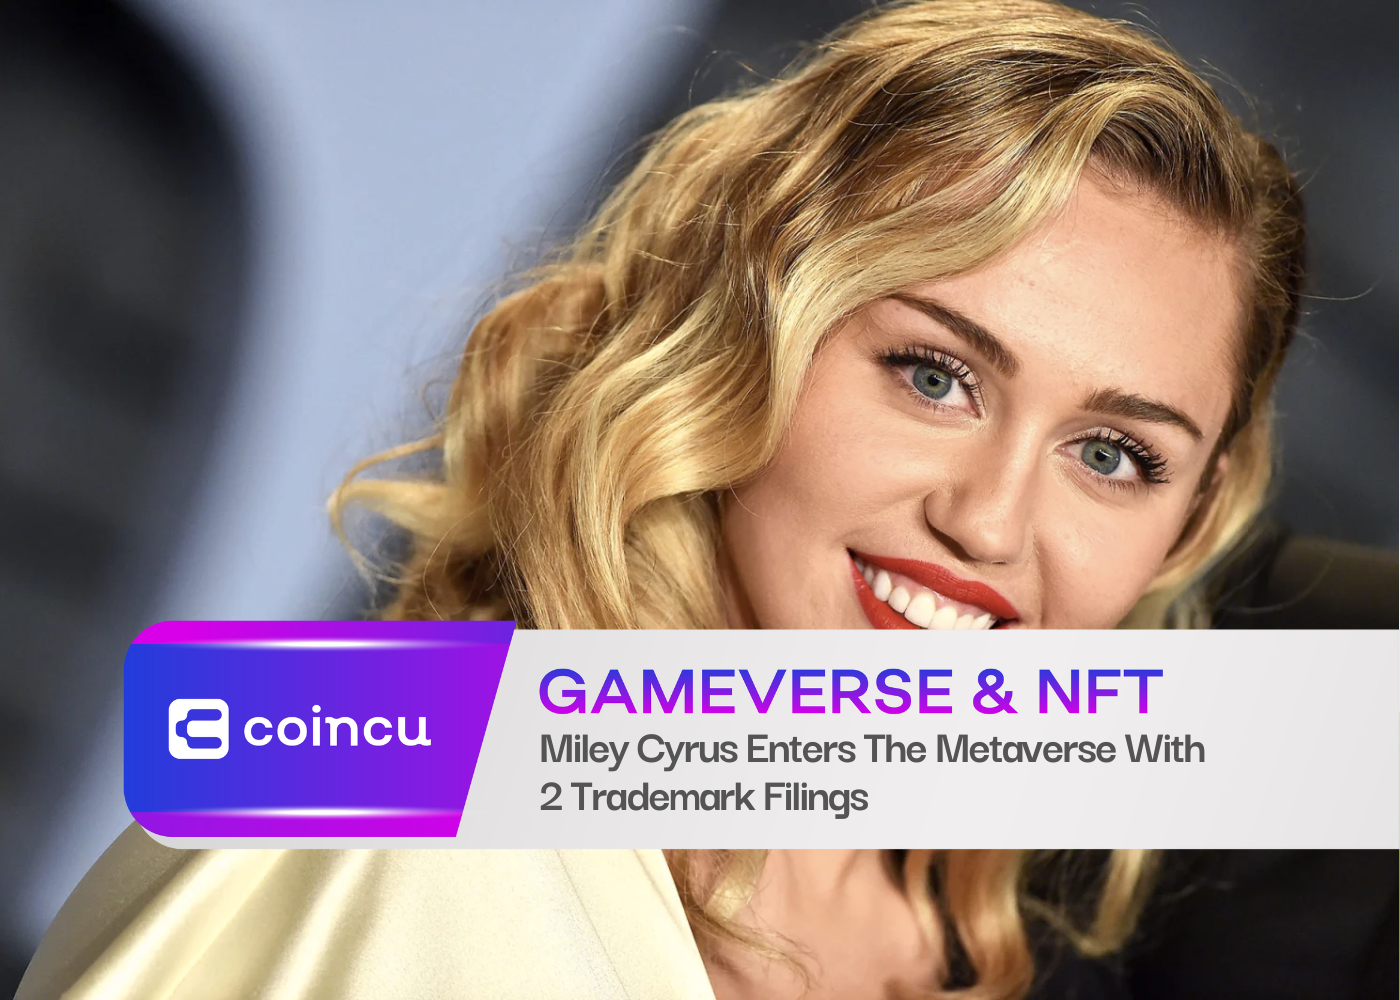 Miley Cyrus Enters The Metaverse With 2 Trademark Filings